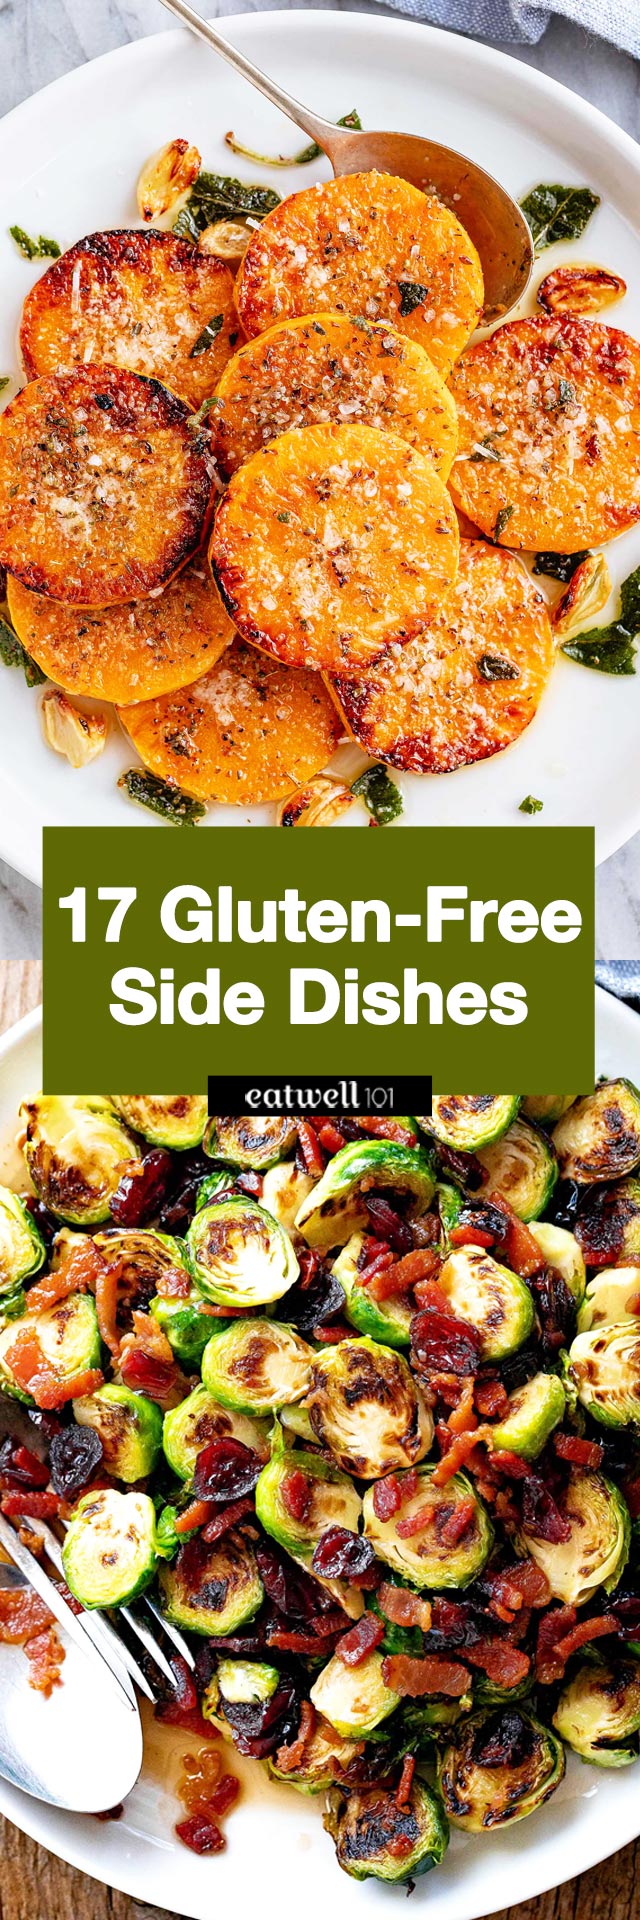 Gluten-Free Side Dishes - #glutenfree #sidedish #recipe #eatwell101 -  Gluten-free eaters, you're in for a treat with these easy gluten-free side dish recipes!